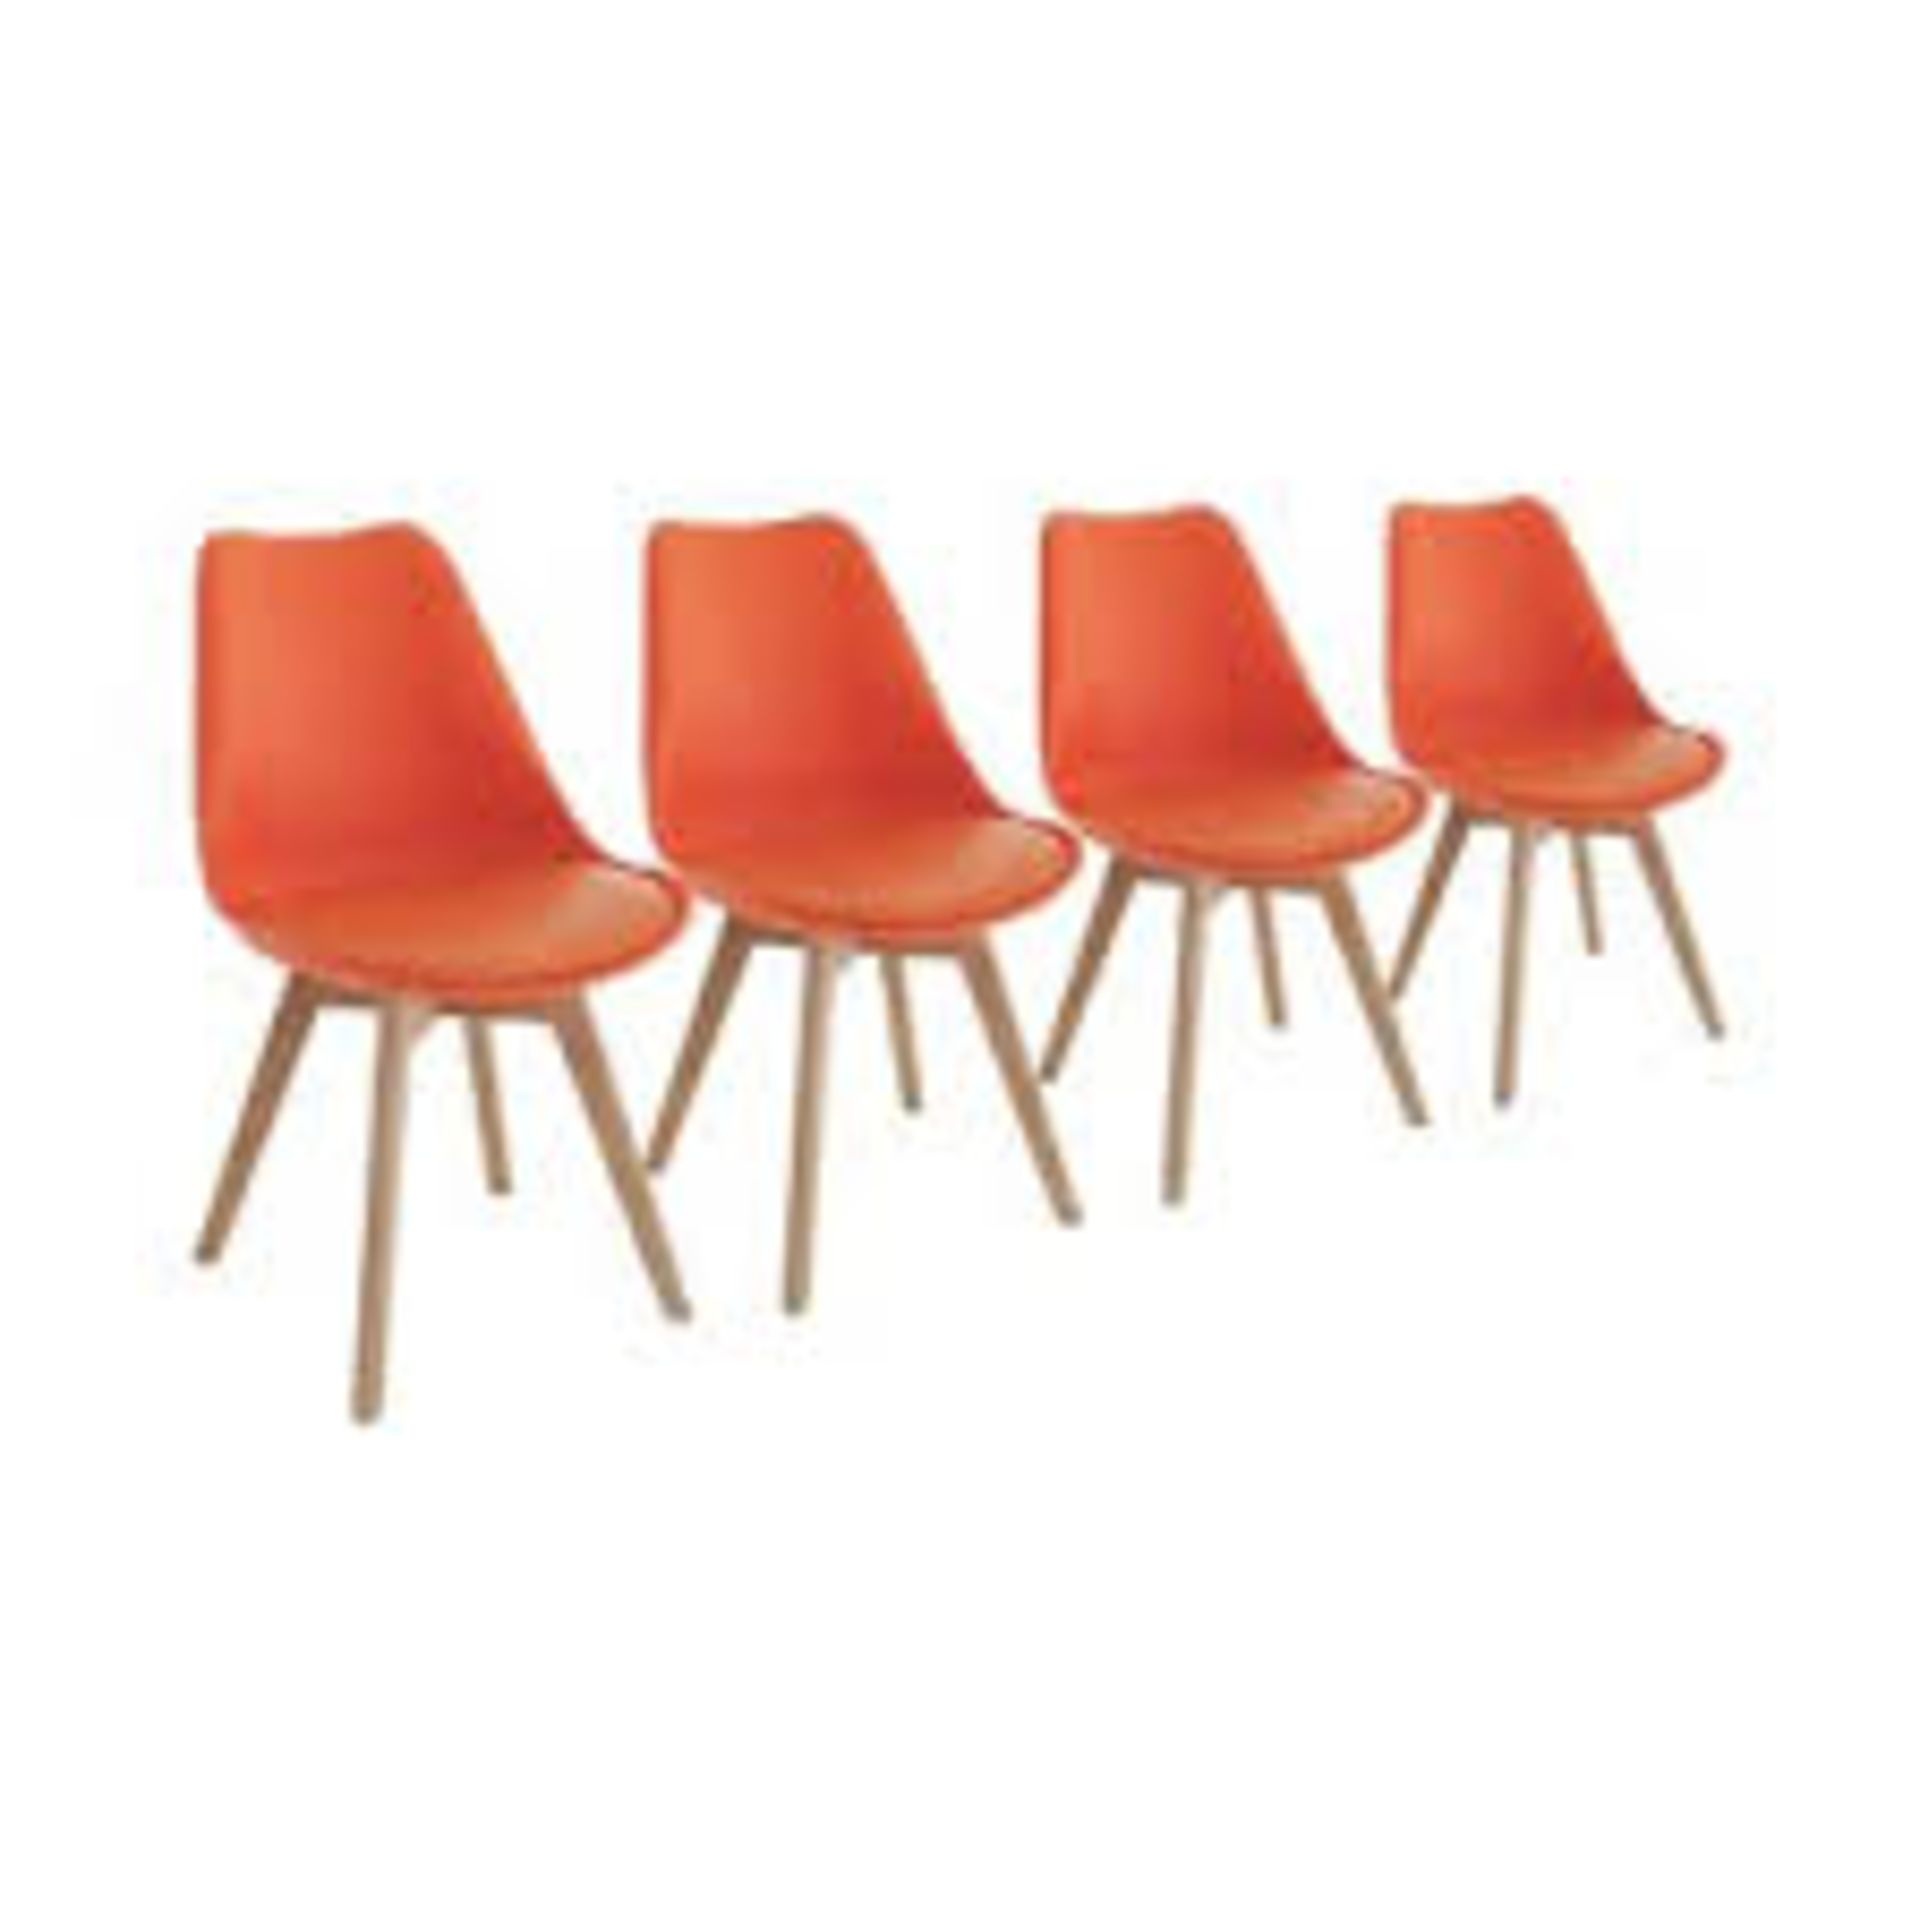 Boxed Set Of 4 Ryder Preston Dining Chairs In Orange RRP £160 (18100) (Pictures Are For Illustration